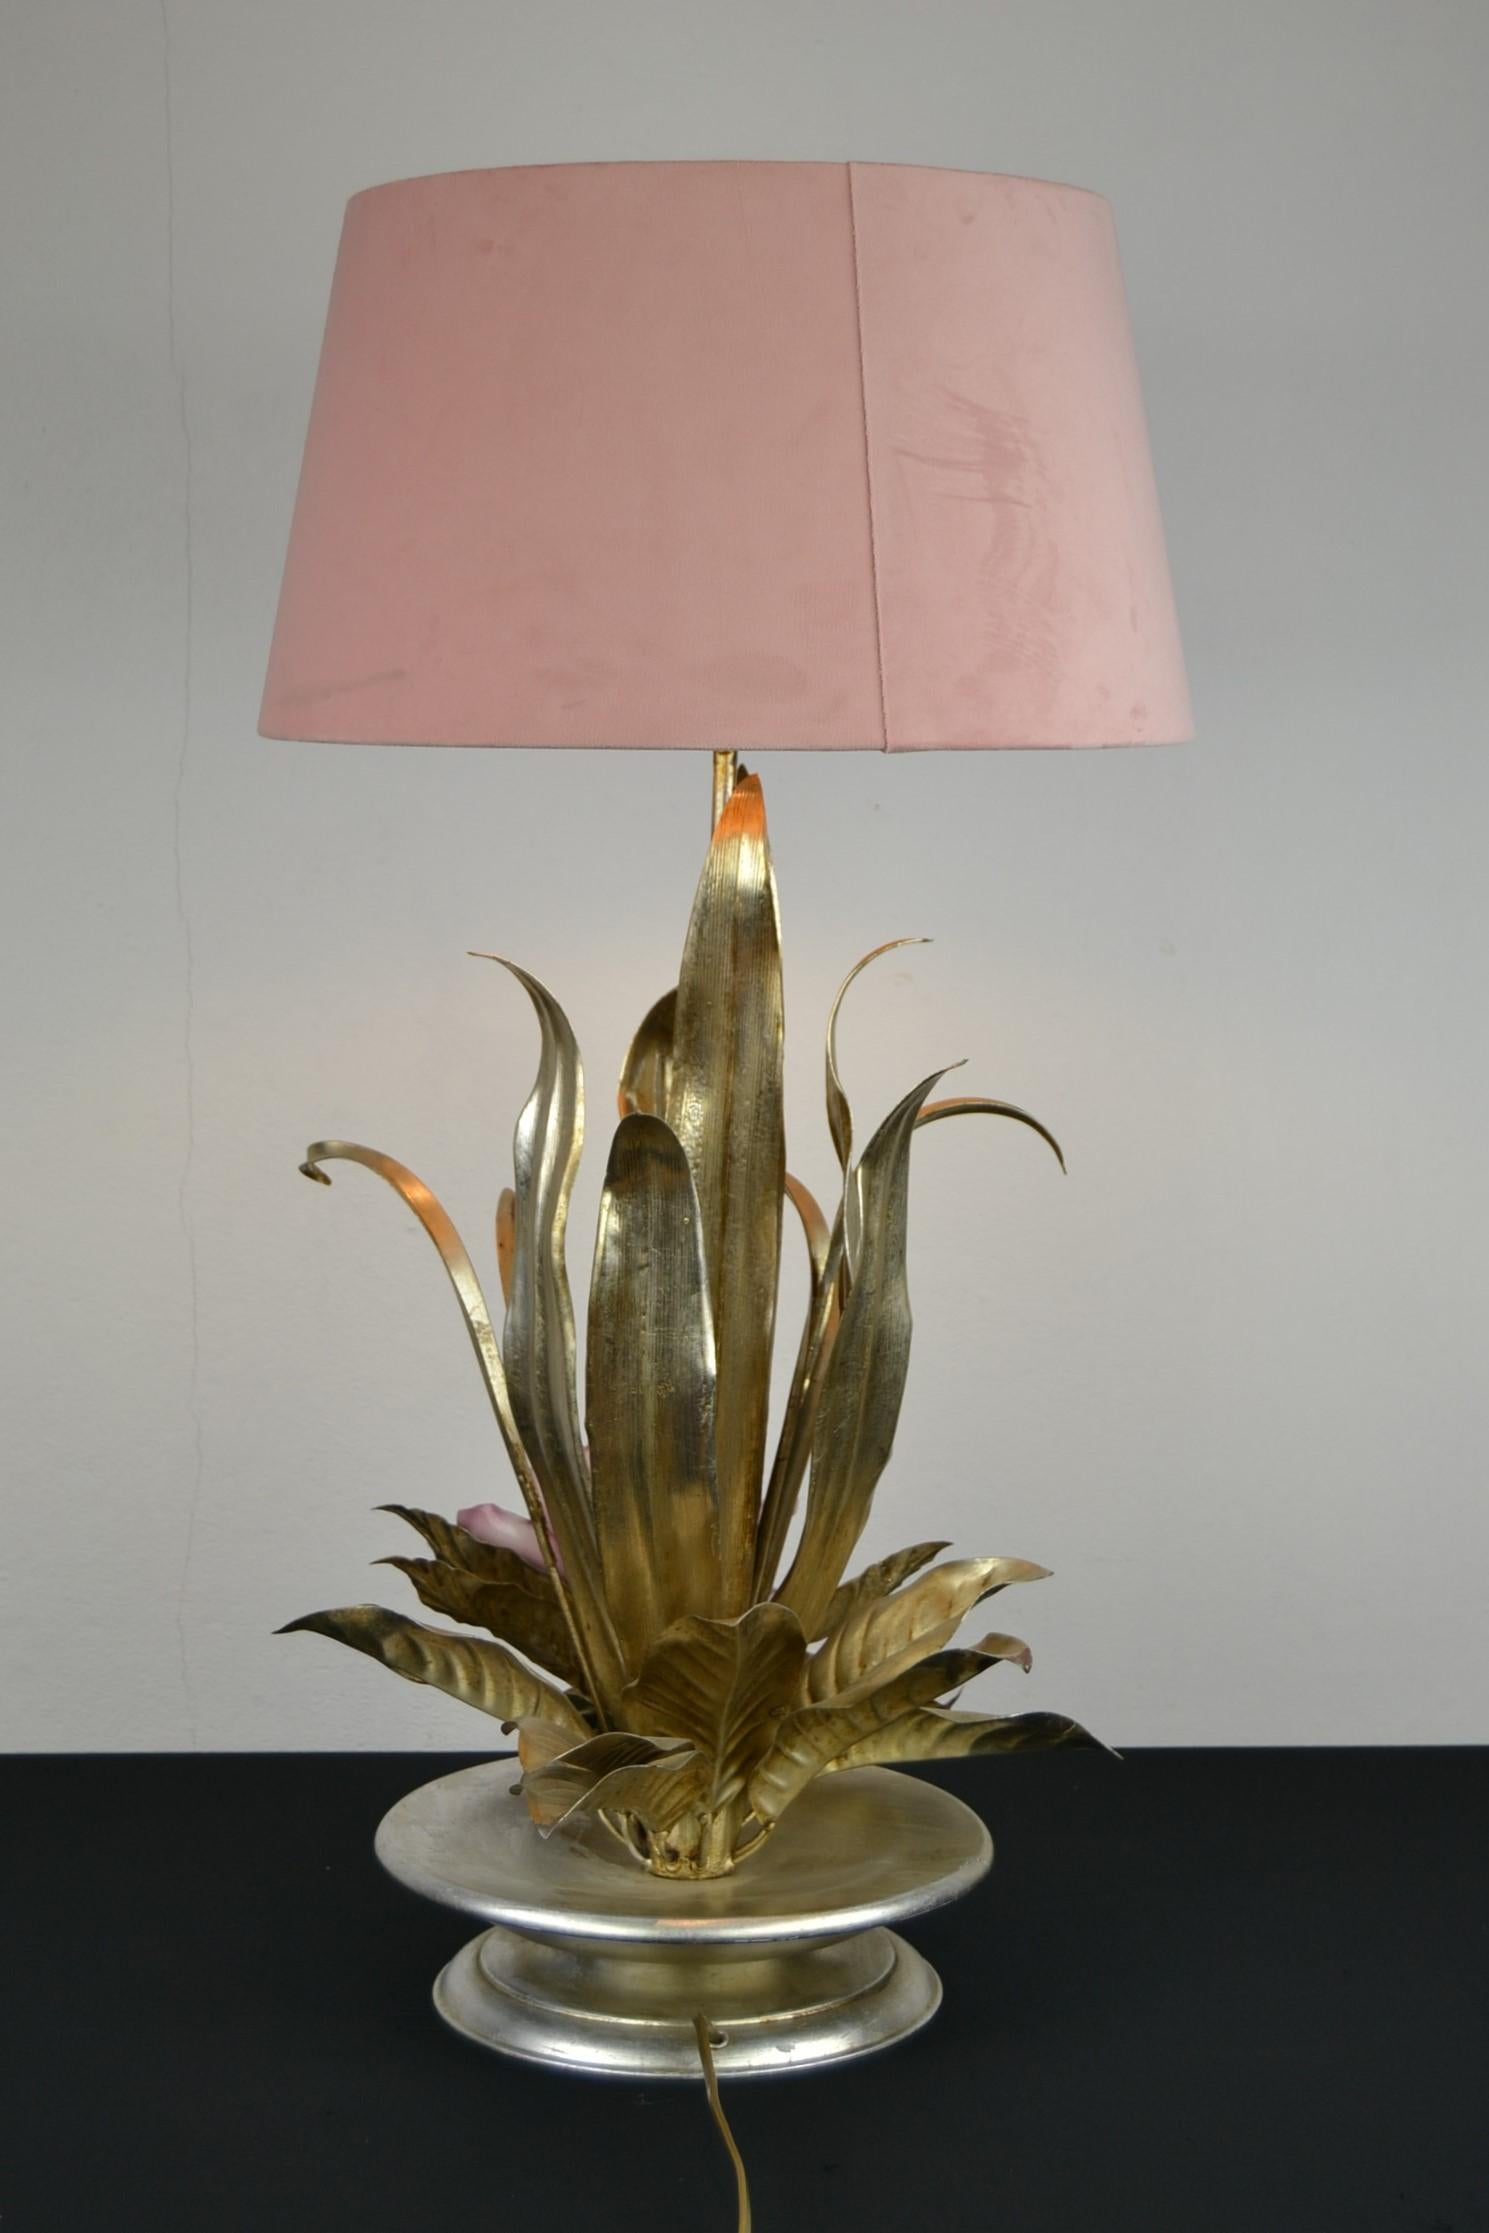 Metal Flower Table Lamp, Pink Flower and Gold Leaves 1